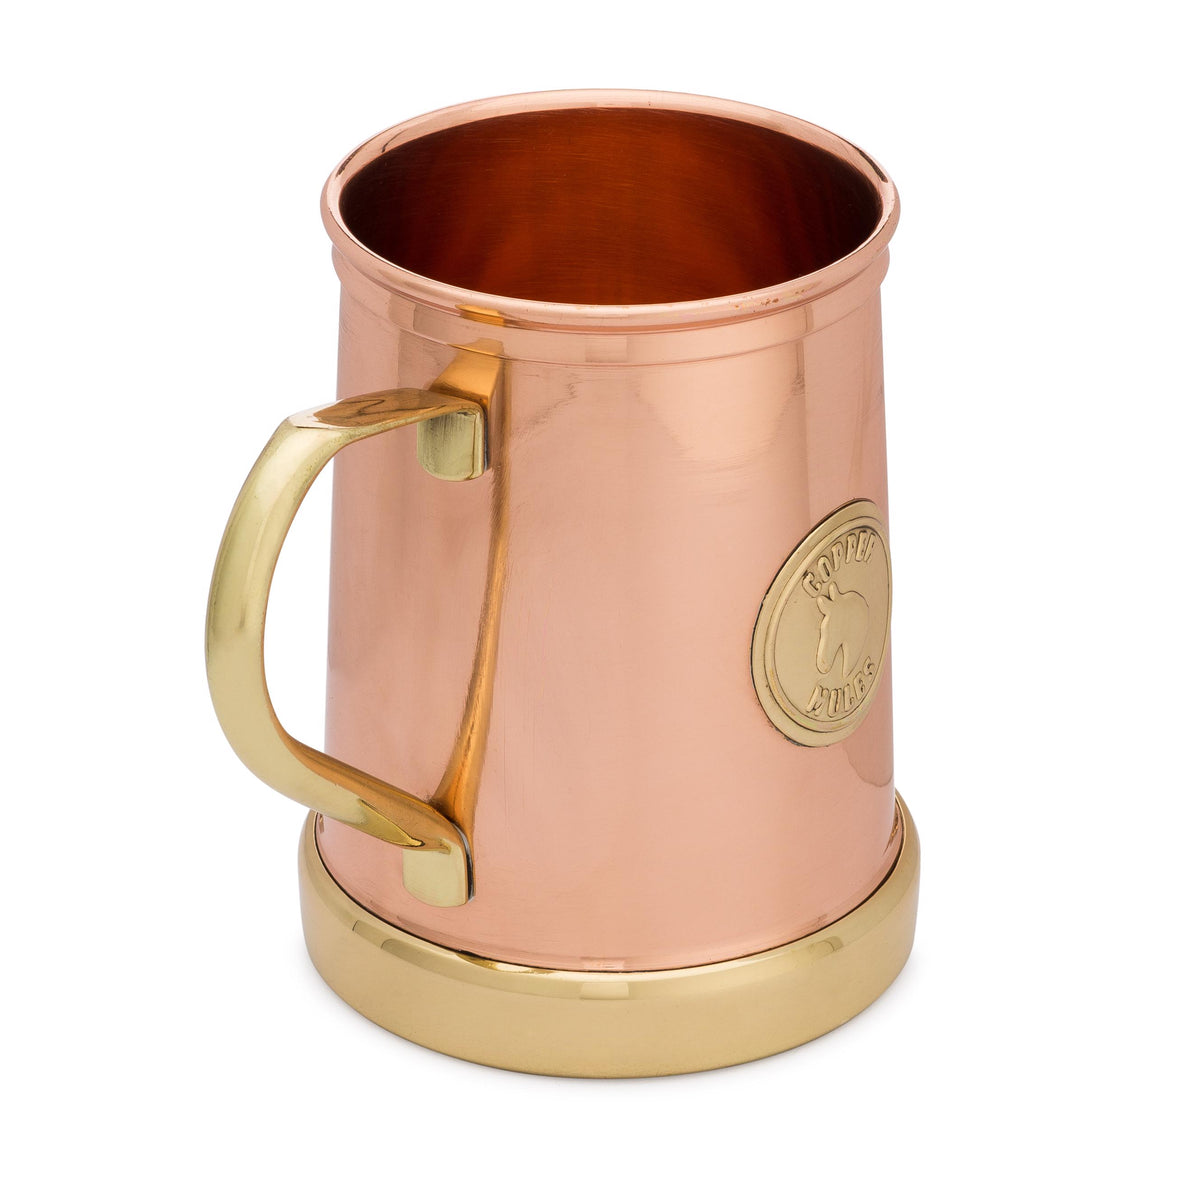 The Moscow Mule Copper Mug – Be True Western & Boutique